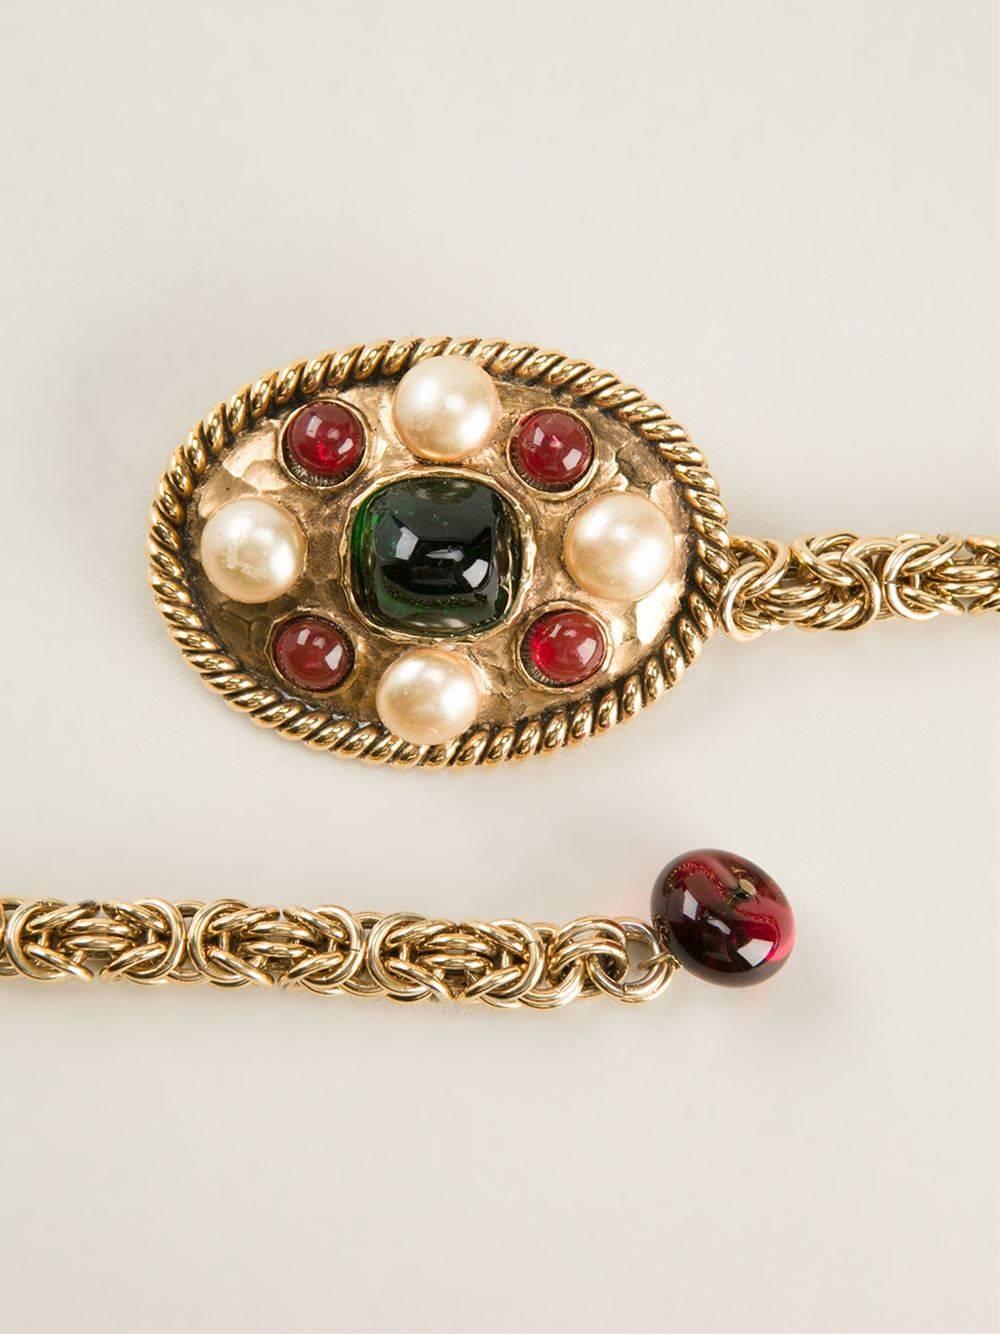 Important Chanel gold-tone pearl embellished chain belt. It features an oval medallion as a buckle, with an emerald green stone at the centre, four small pearls around it, alternated with four small red glass stones. Hook closure. The item is